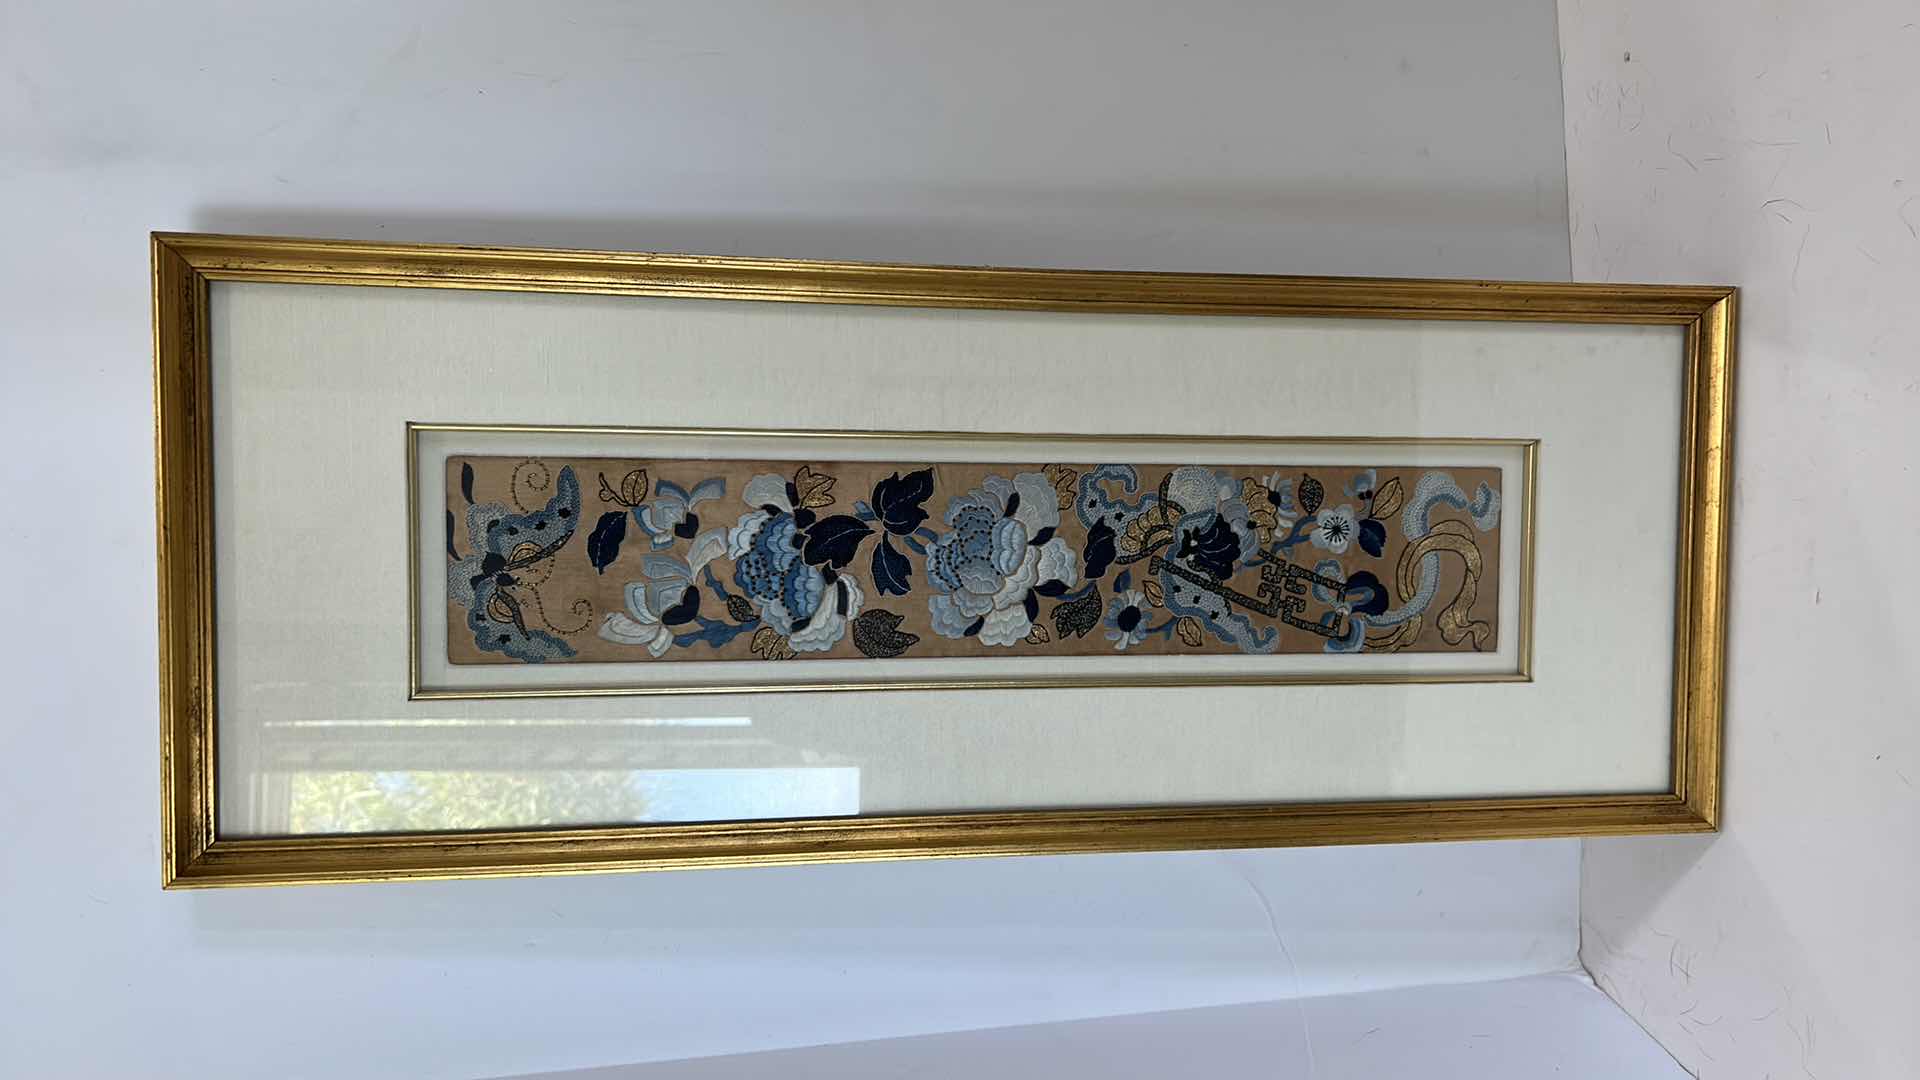 Photo 6 of ANTIQUE CHINESE TEXTILE FABRIC, SILK WITH SILK THREAD HAND EMBROIDERY ARTWORK FRAMED 10” x 26 1/2”